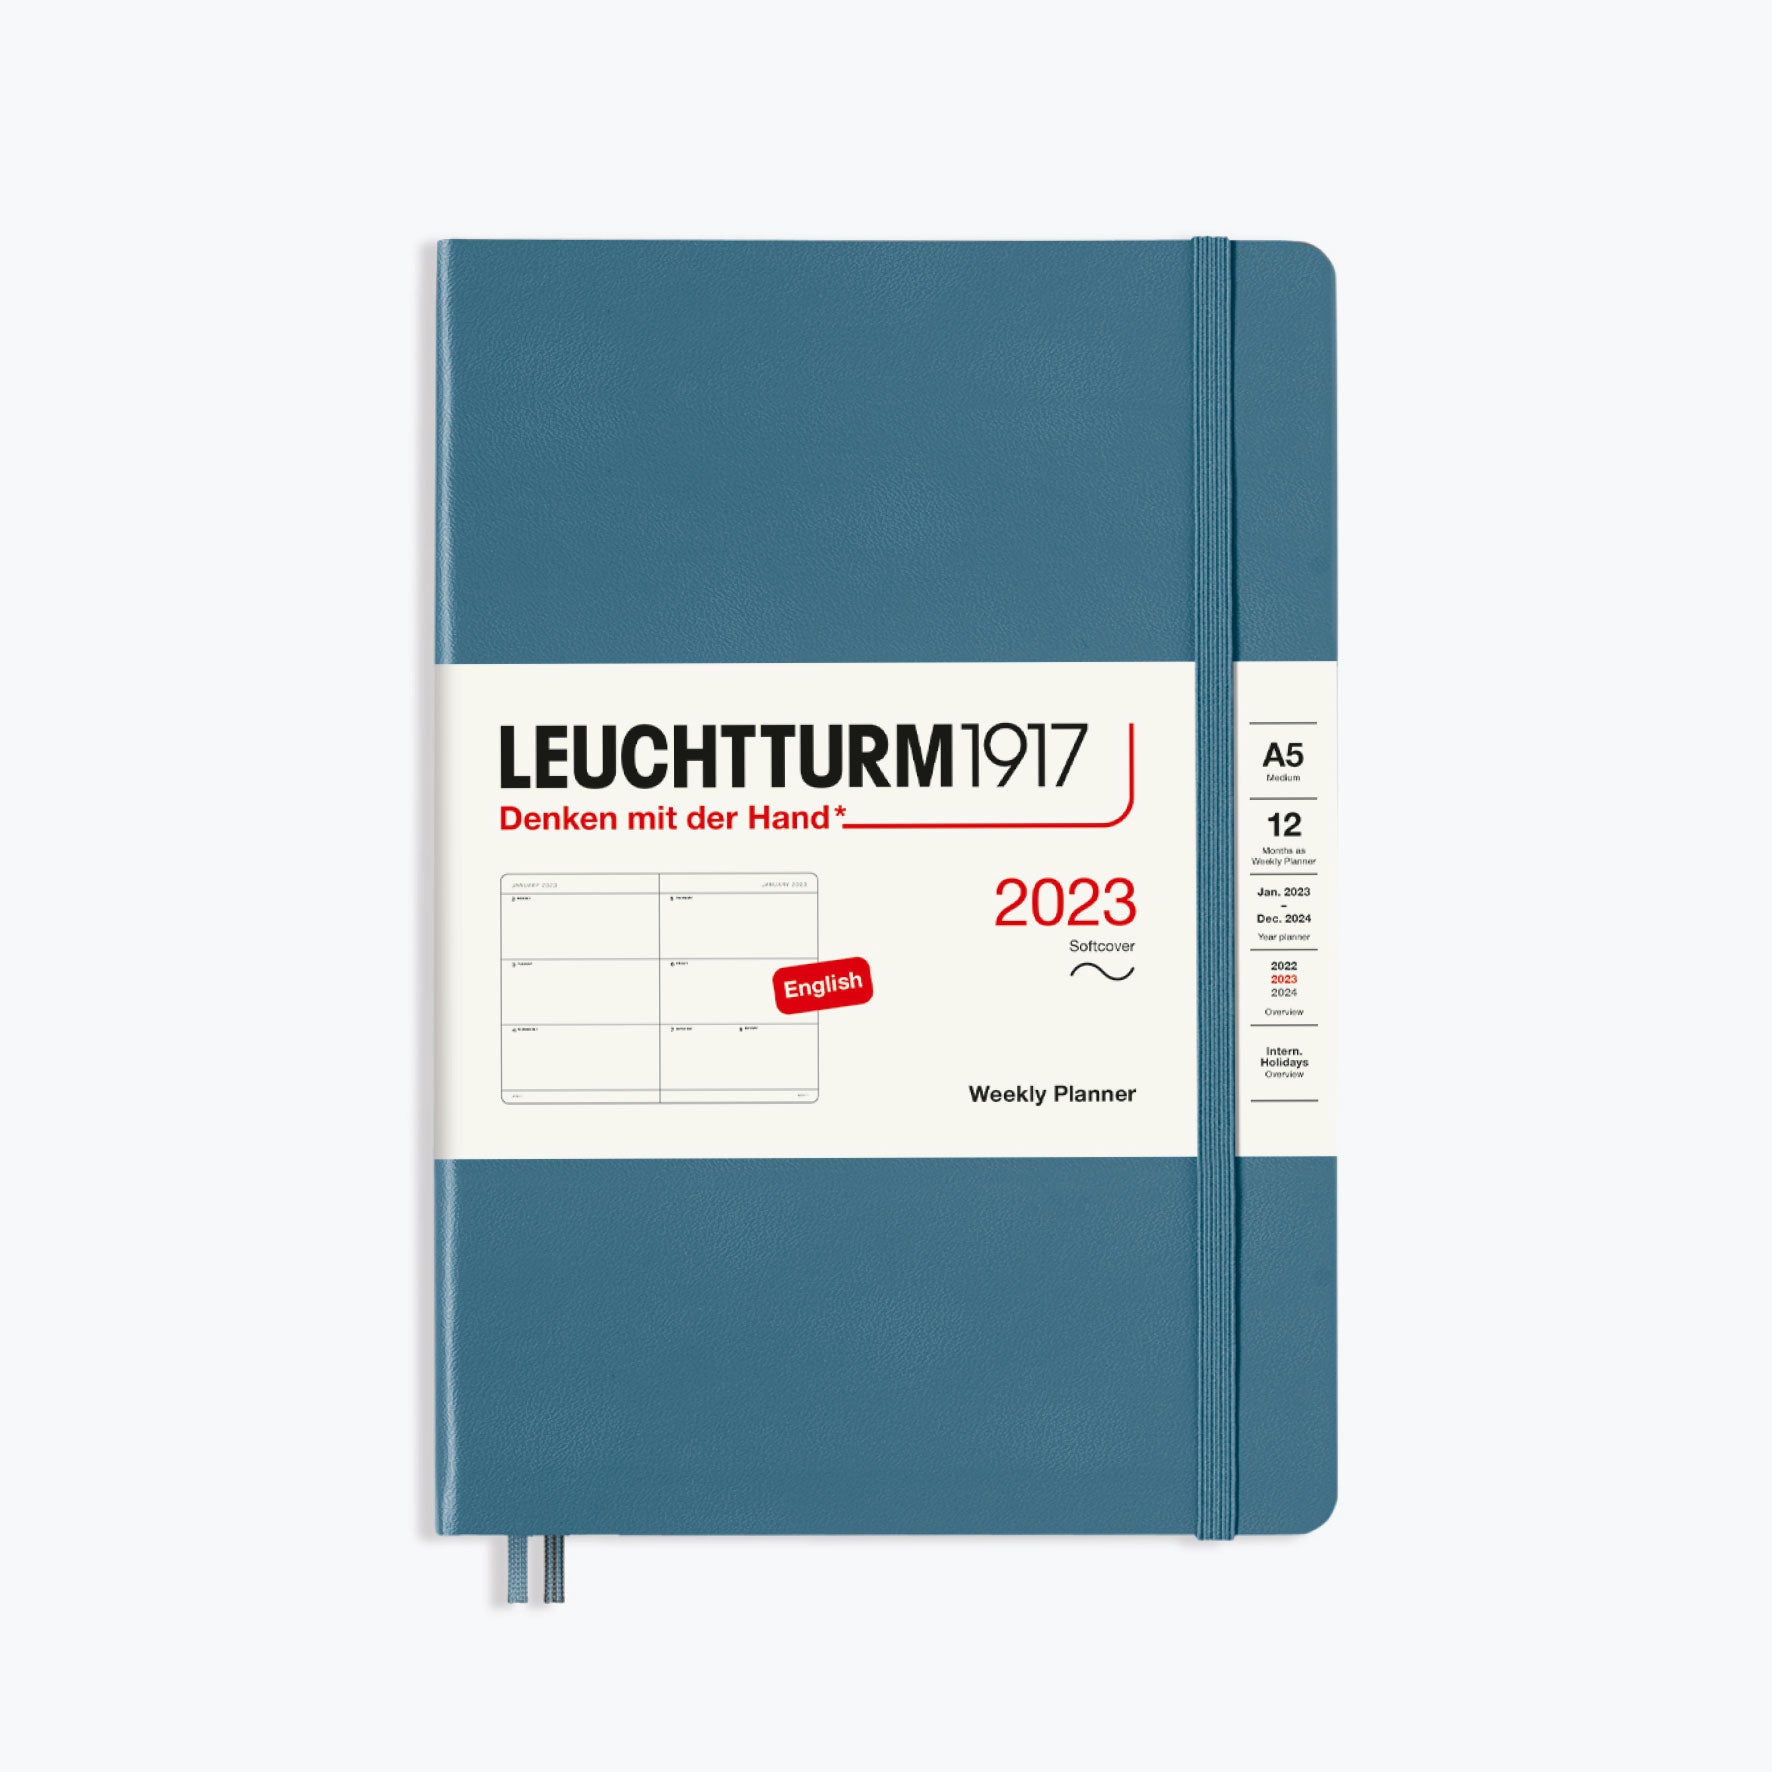 Leuchtturm1917 - 2024 Diary - Weekly Planner - A5 - Stone Blue (Soft)